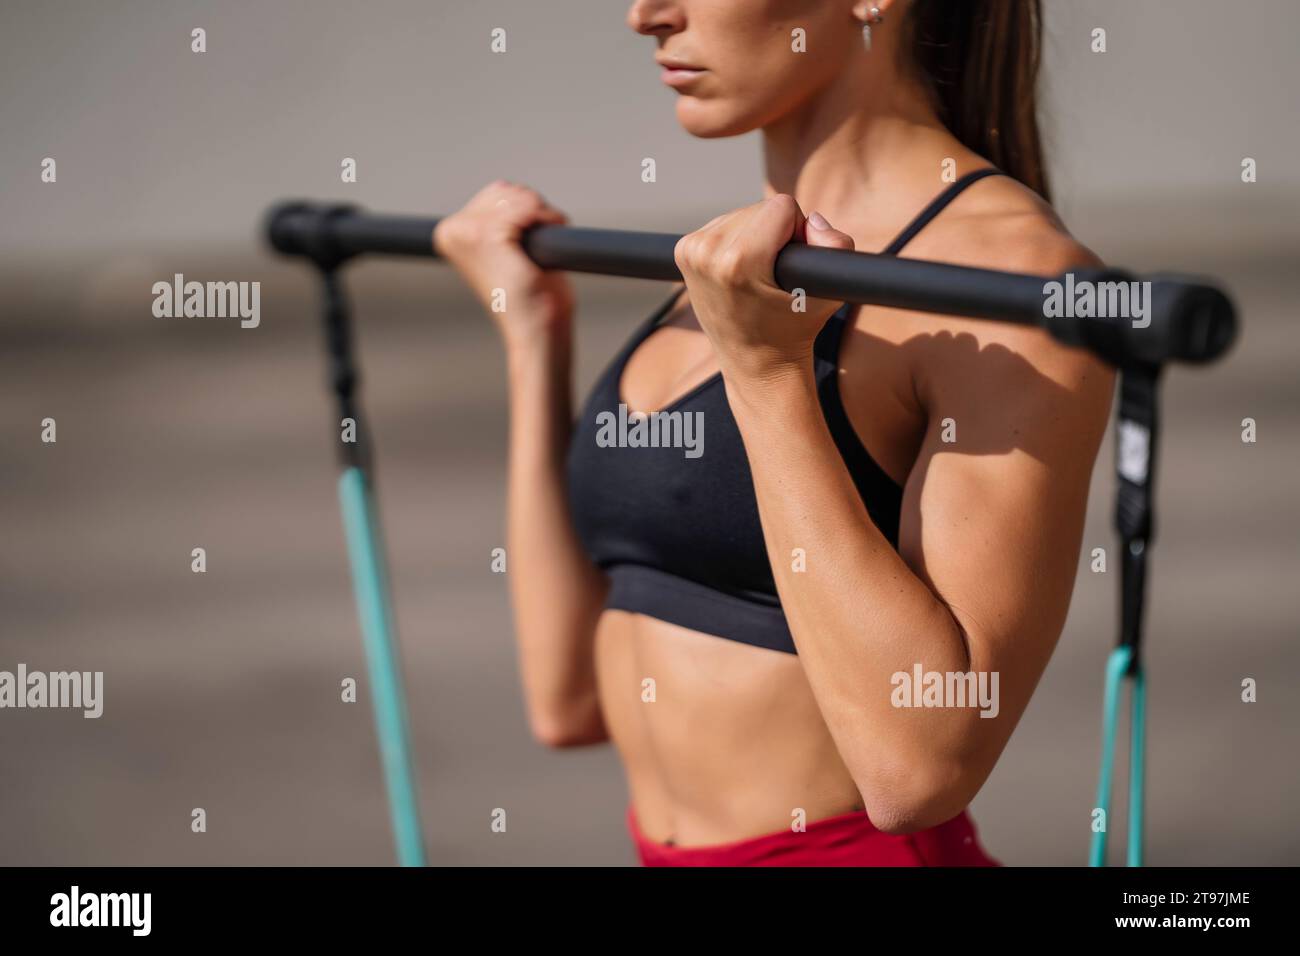 Active woman doing strength training using resistance band Stock Photo